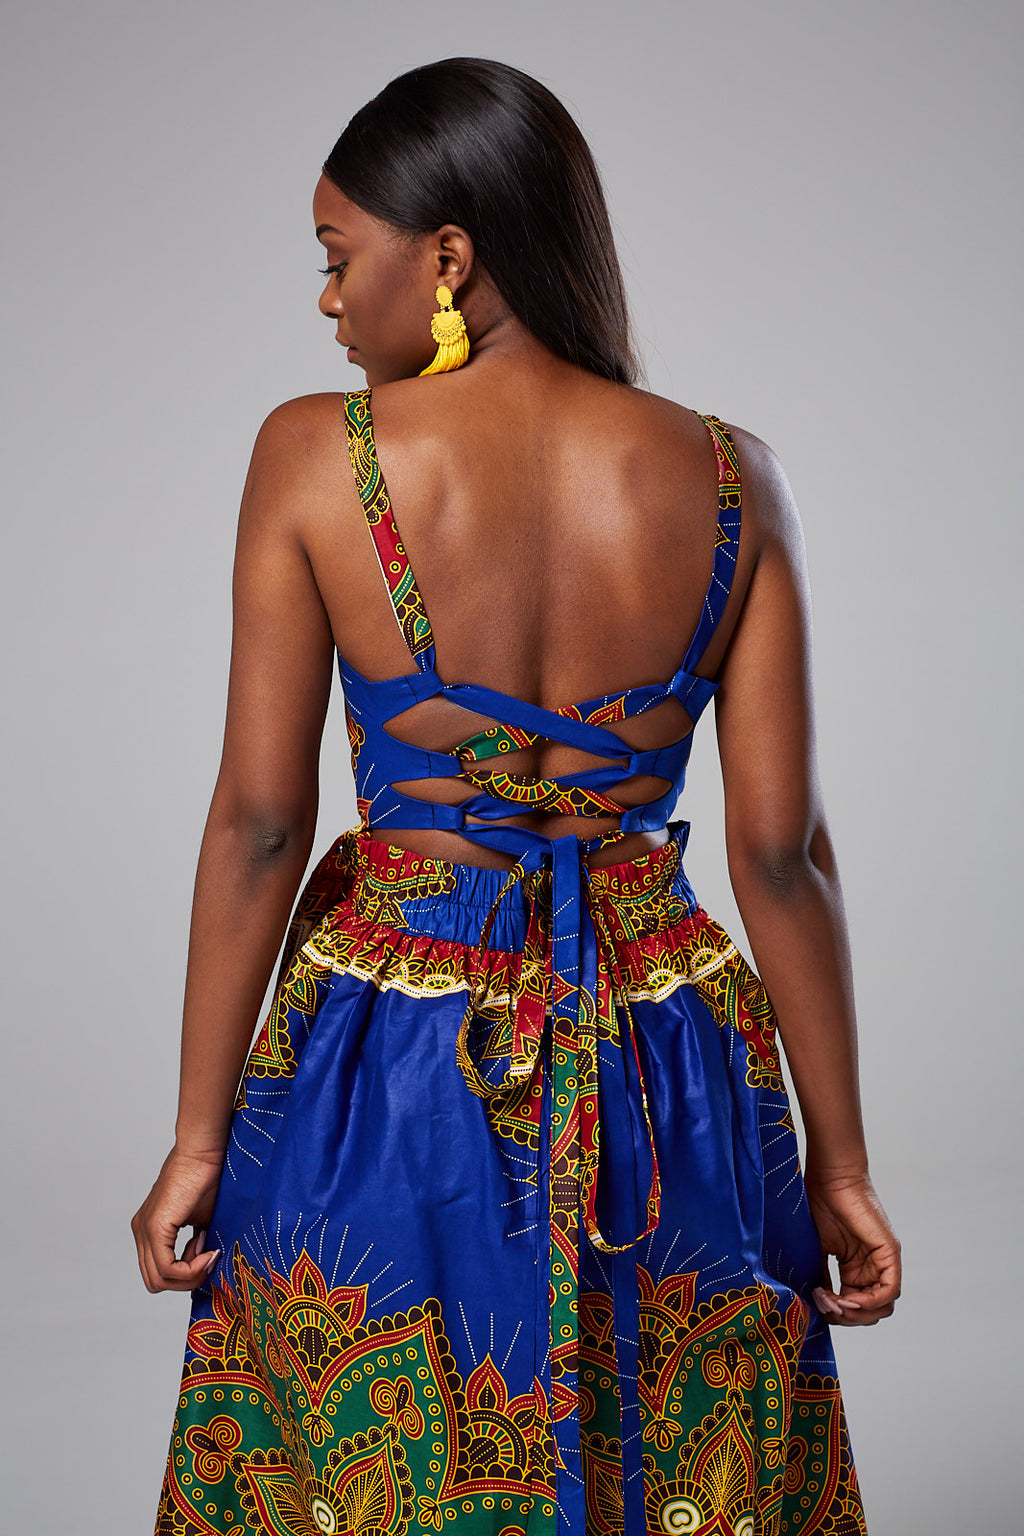 L Aviye African Clothing For Women African Dresses African Skirts